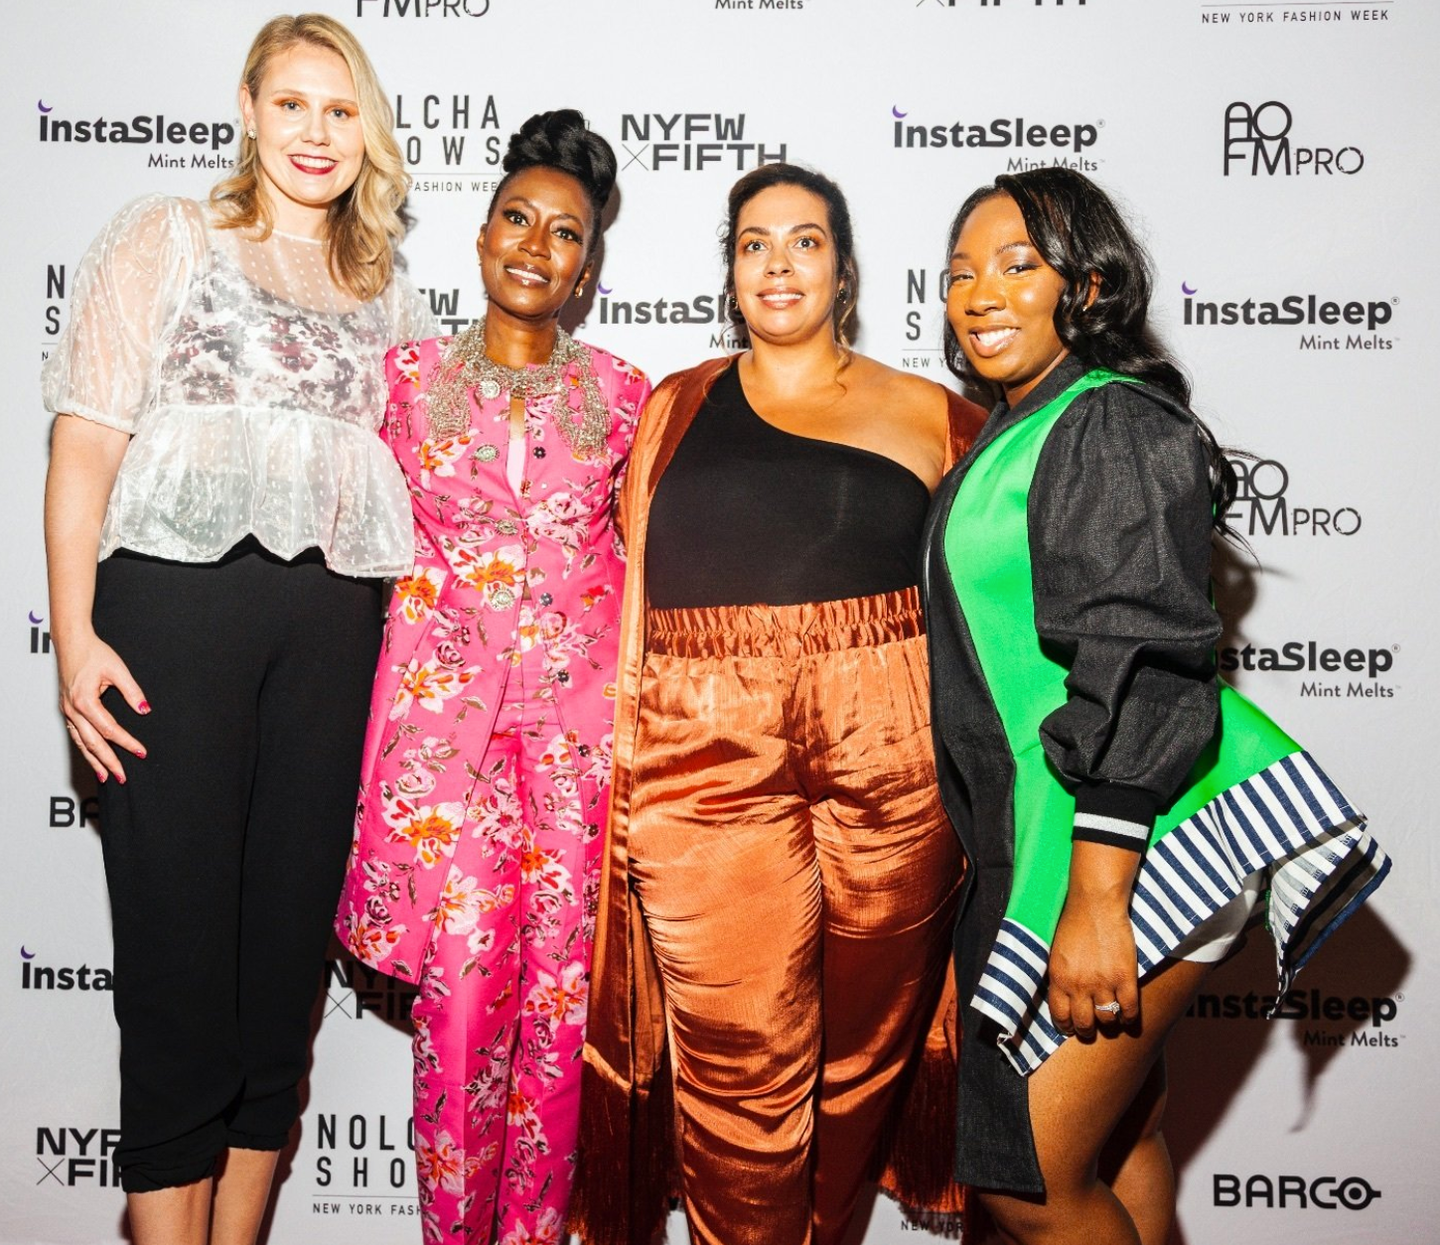 Military spouses treated to VIP experience at New York Fashion Week